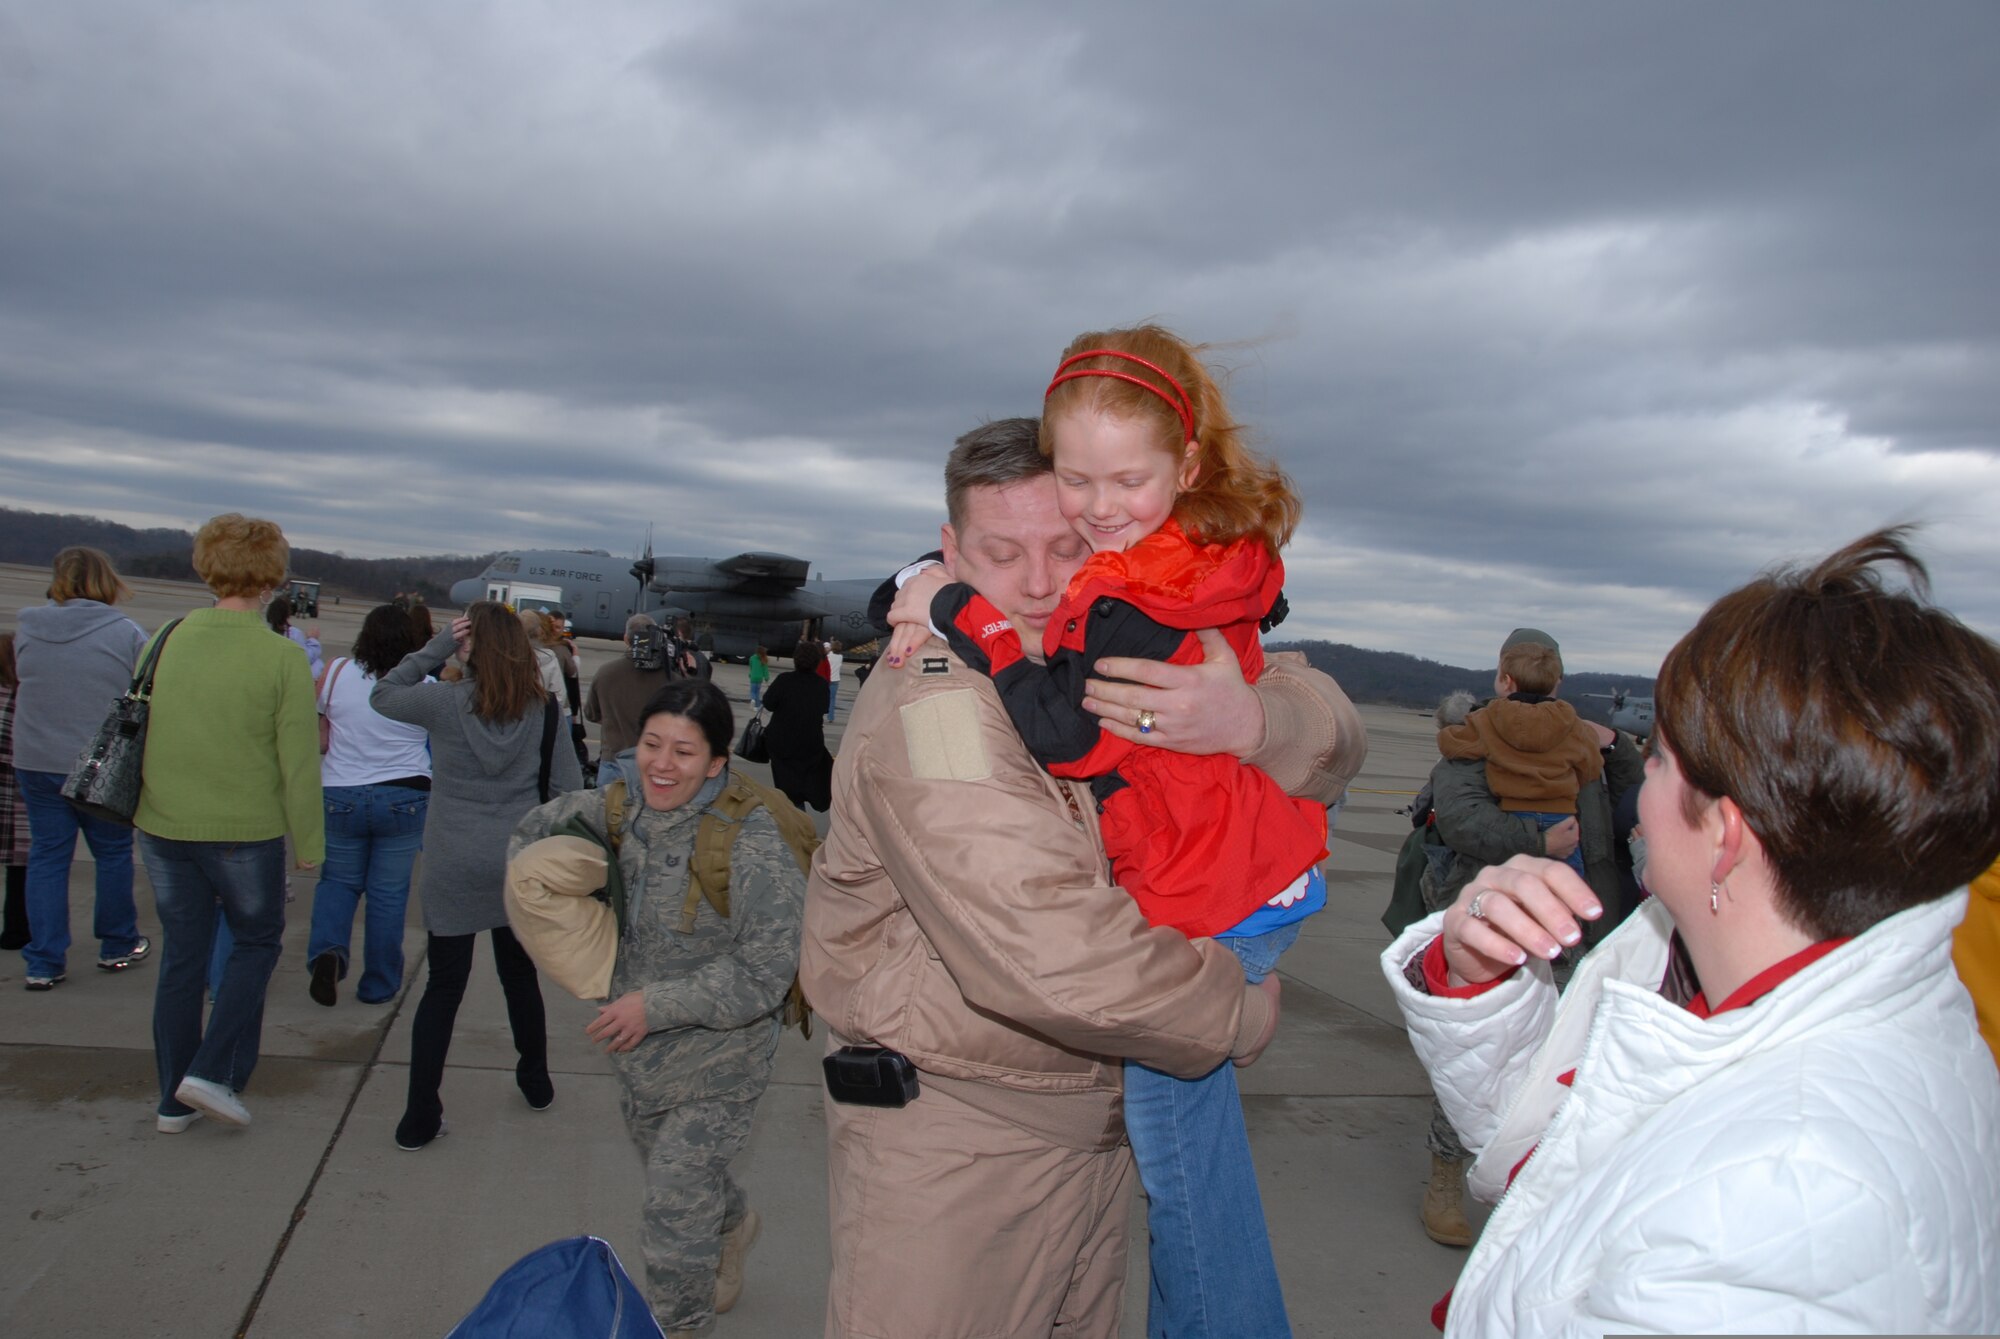 U.S. Air Force 130th Airlift Wing Air National Guardsmen return home Feb. 18, 2009, to Air National Guard Base Yeager in Charleston, W.V., after a lengthy deployment to Bagram, Afghanistan. (U.S. Air Force photo by Staff Sgt. William John Hinamon/Released)

